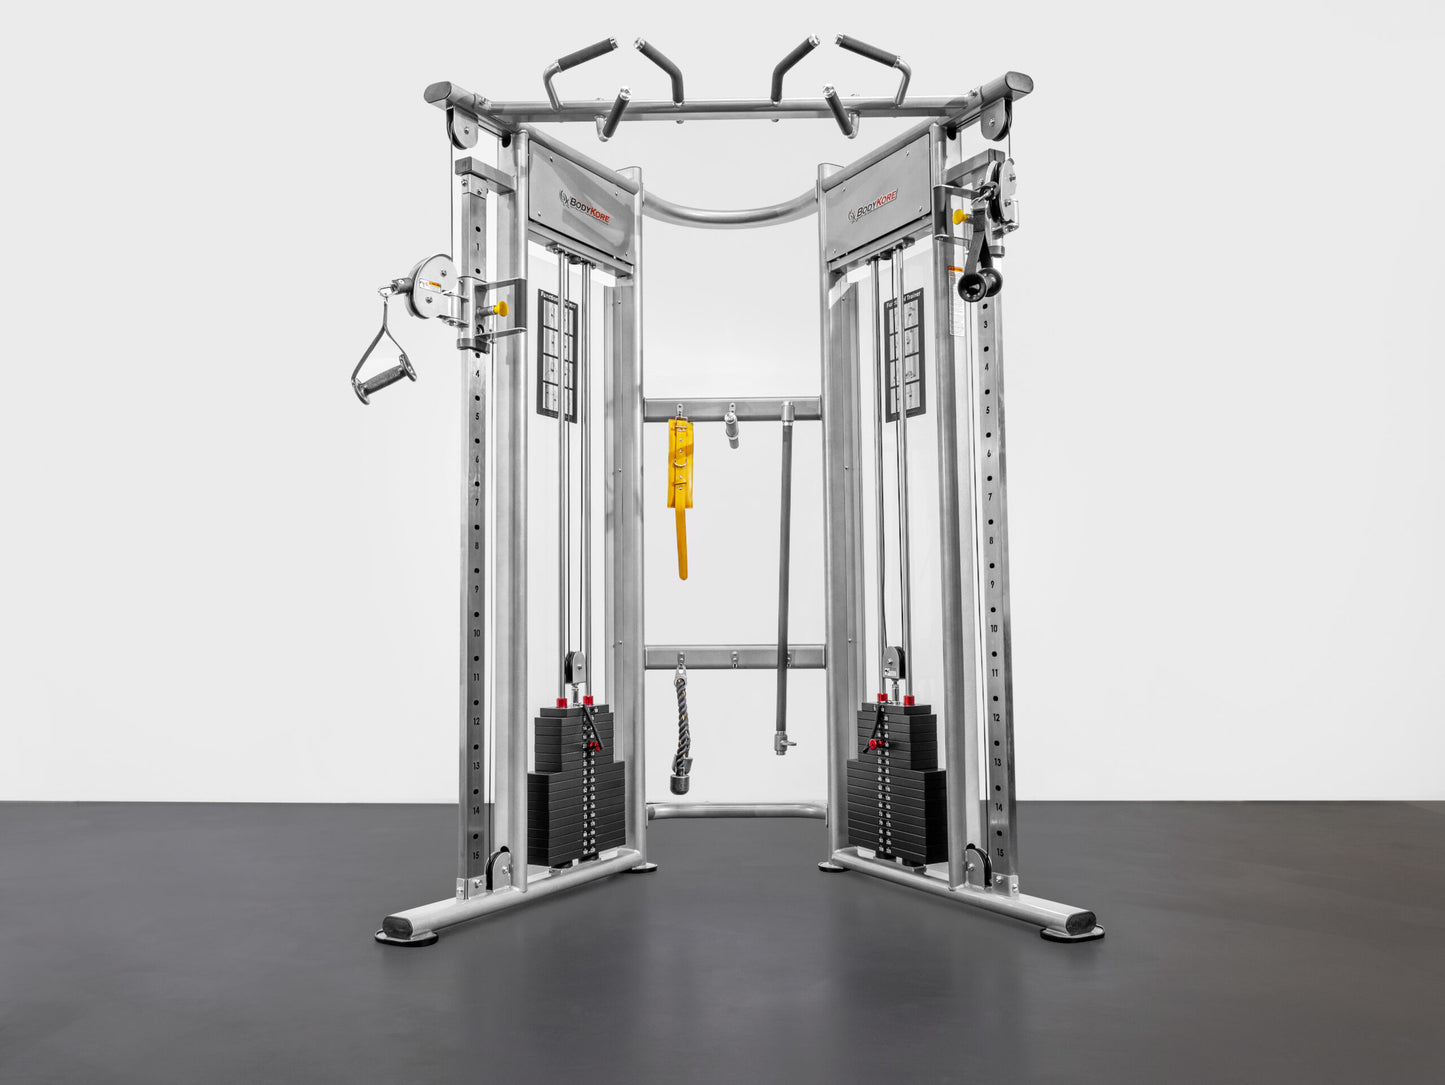 Dual Adjustable Pulley System - MX1161 Body Kore Functional Trainer